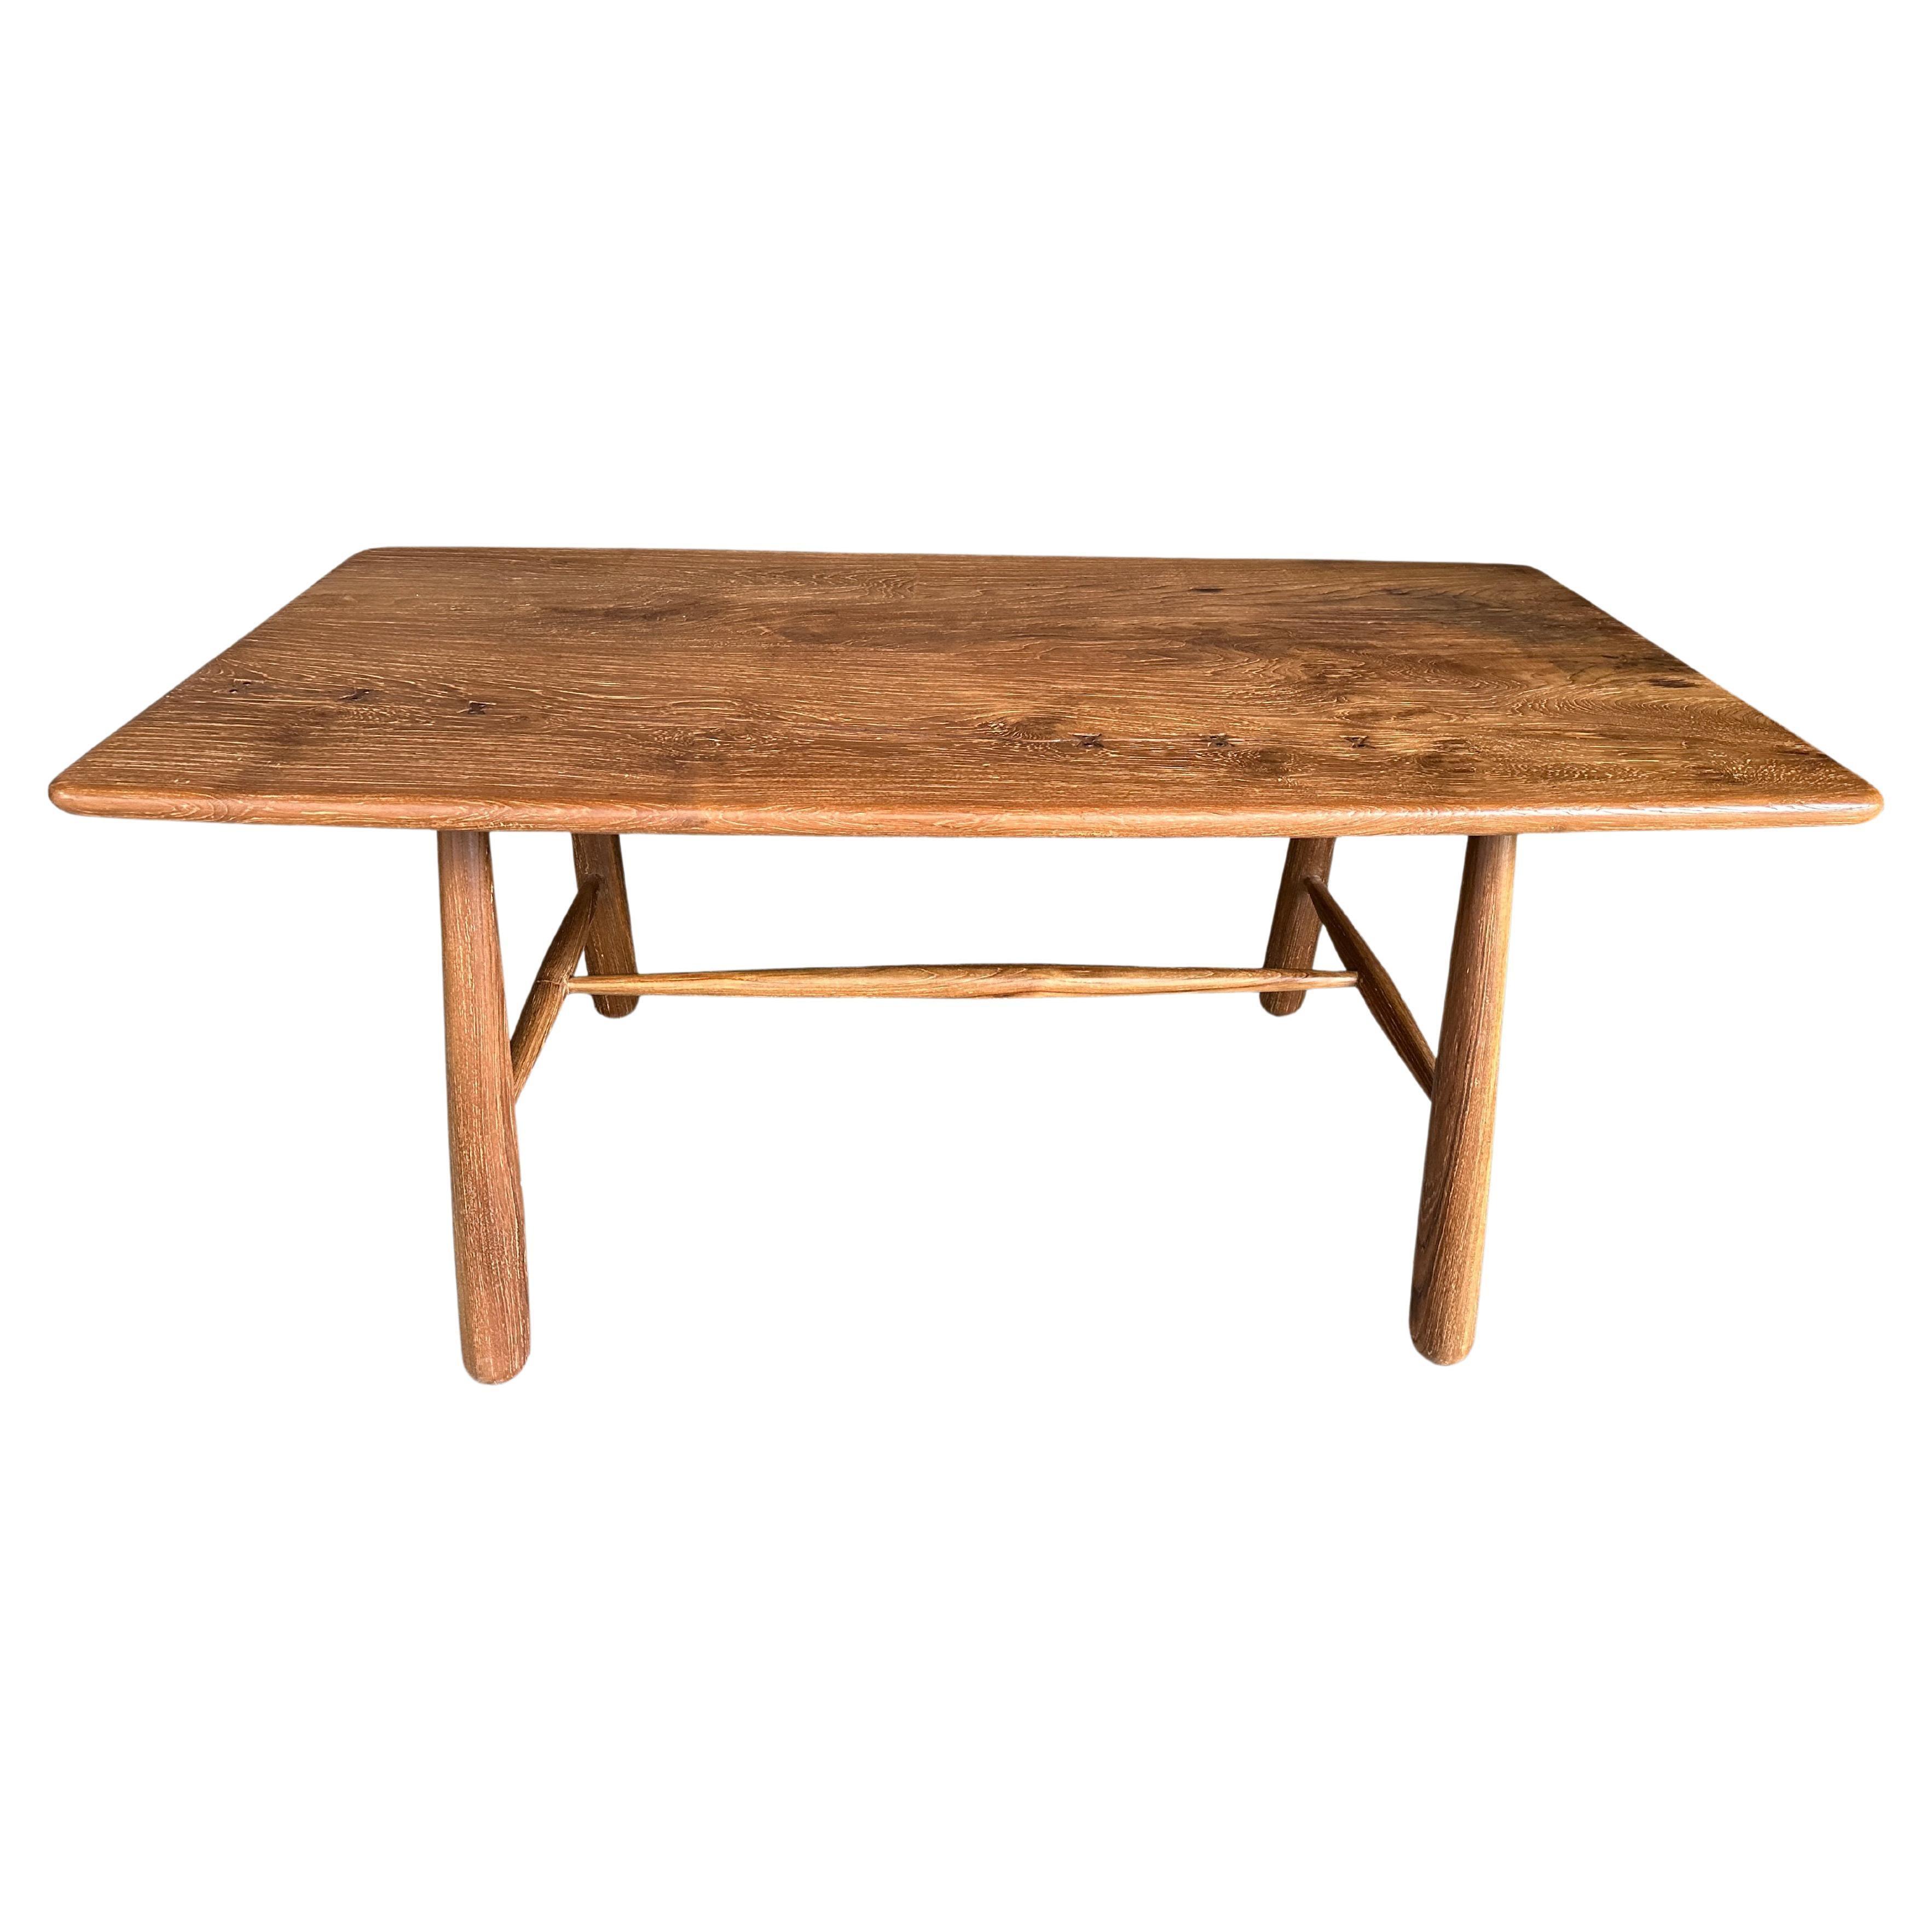 Midcentury Couture Teak Wood Dining Table or Desk For Sale